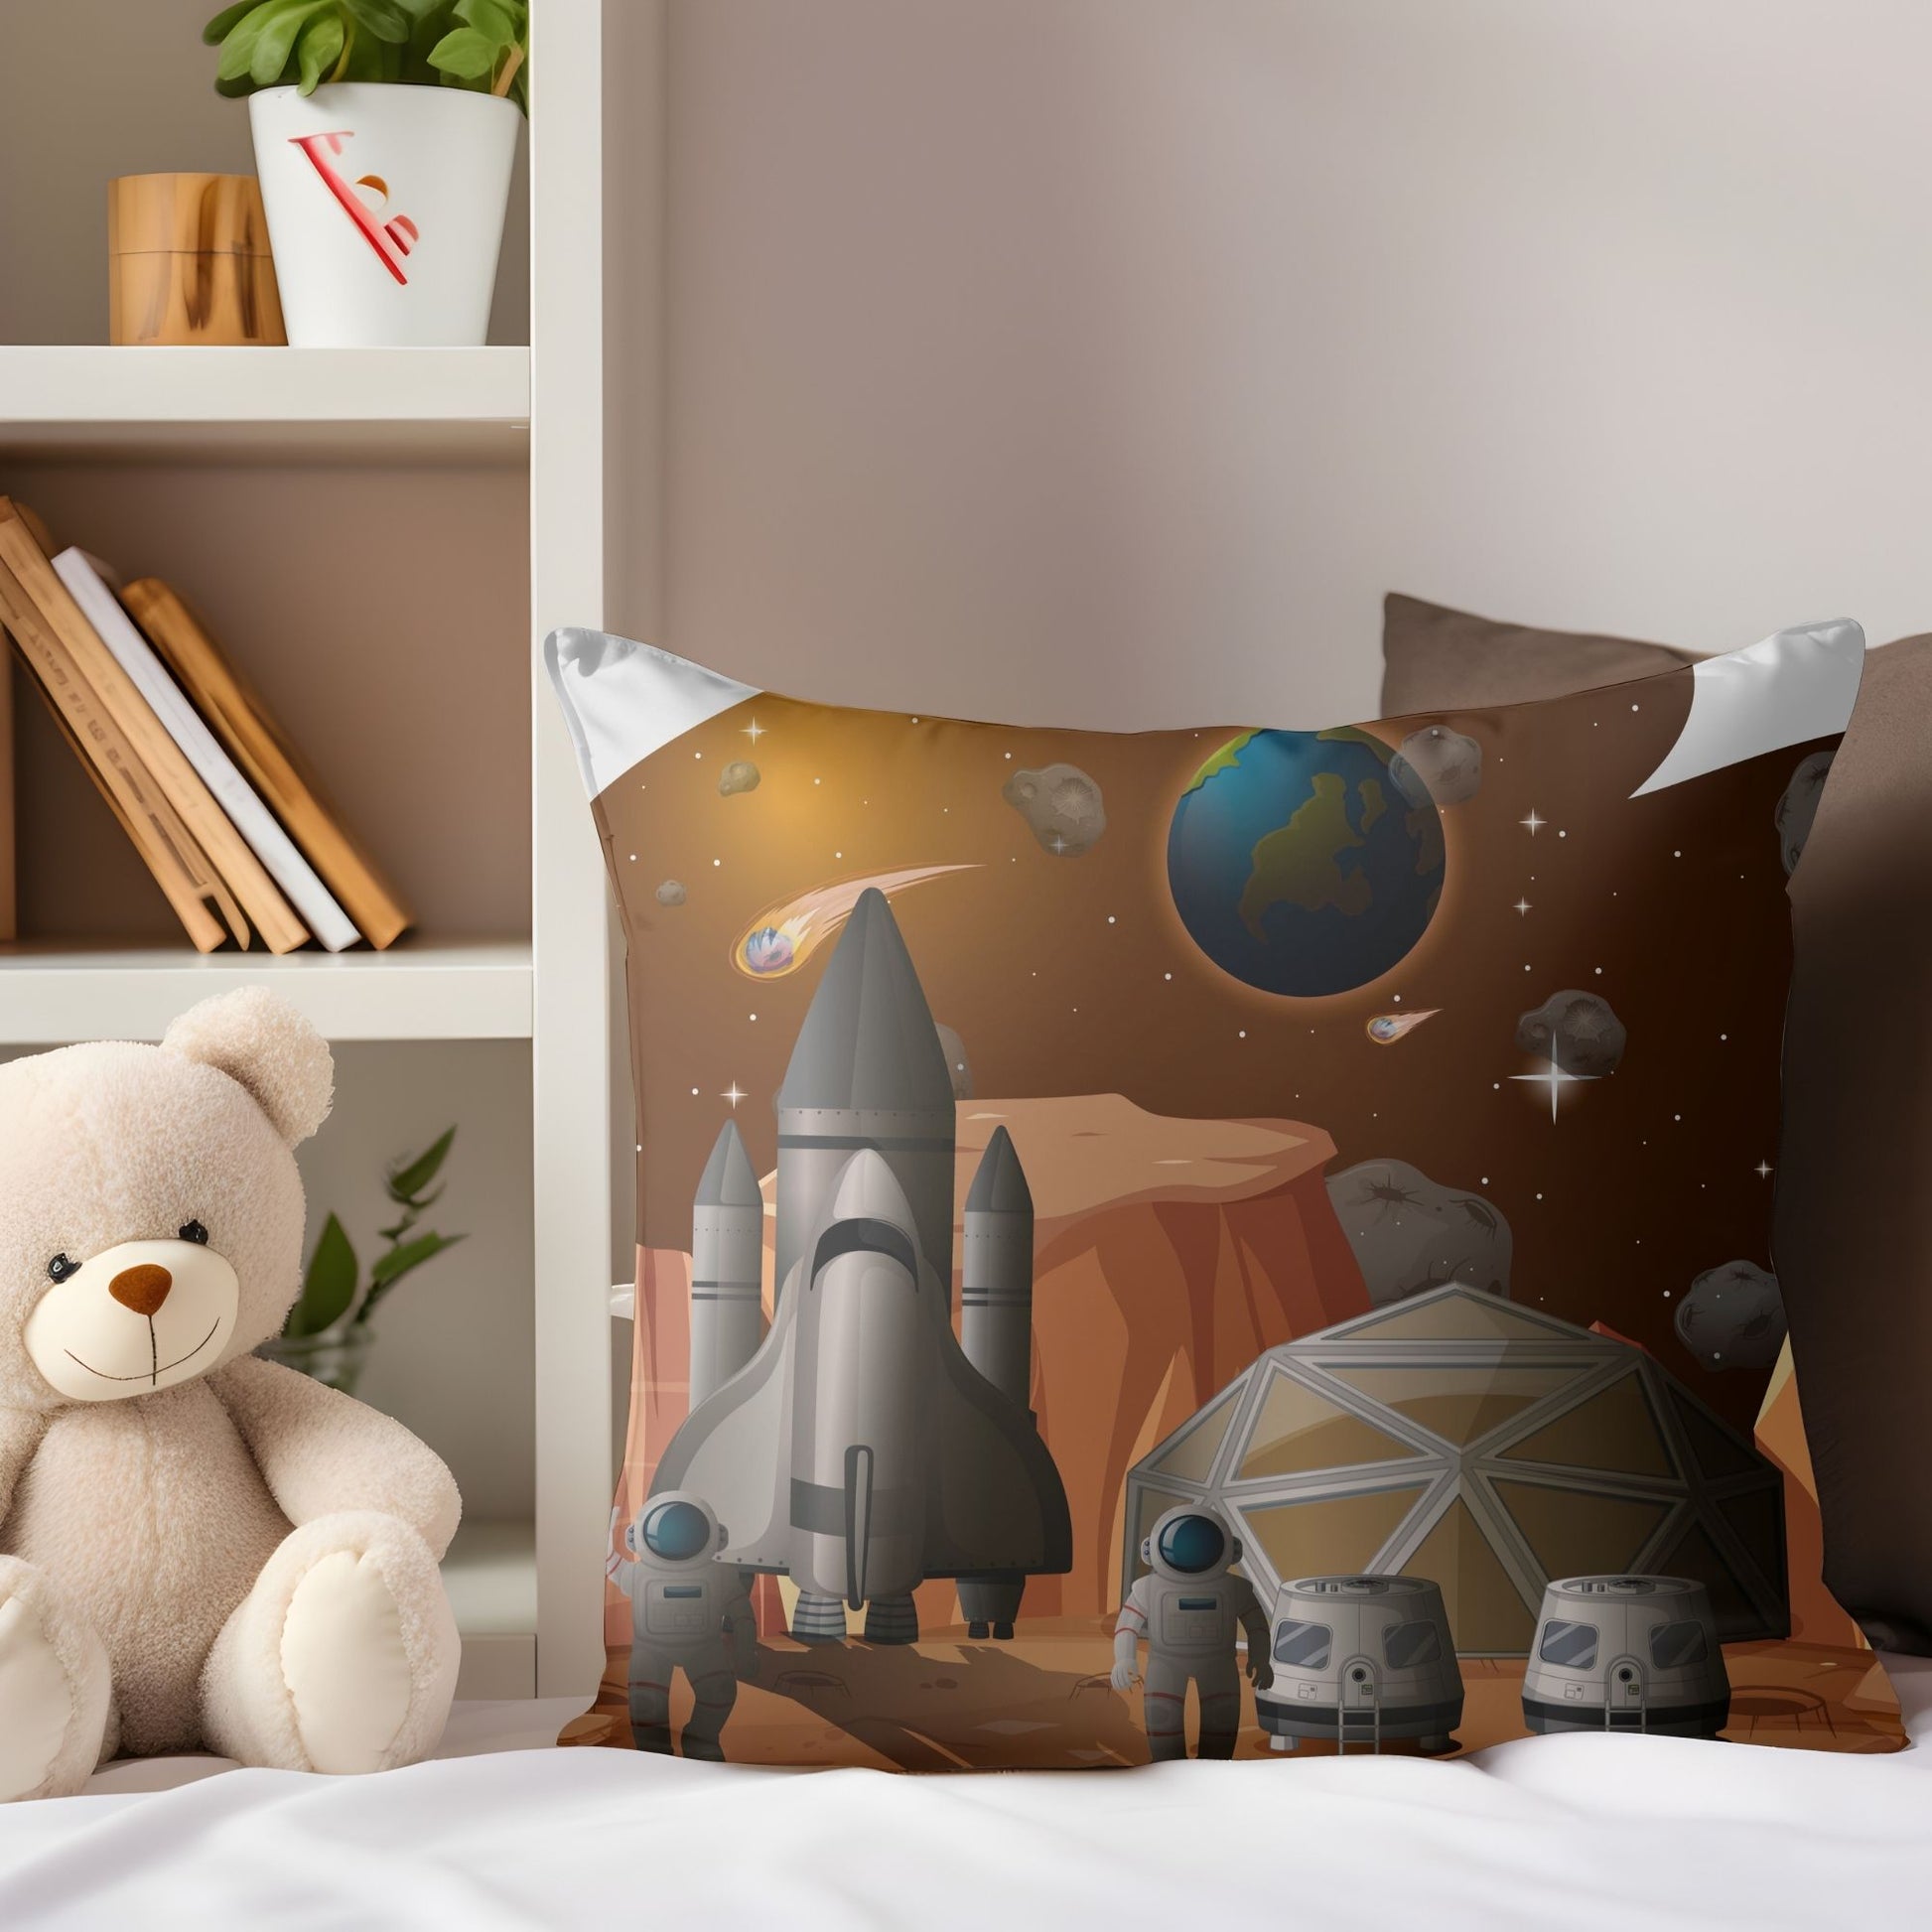 Vibrant kids pillow with a spacecraft and astronaut design for cosmic comfort.